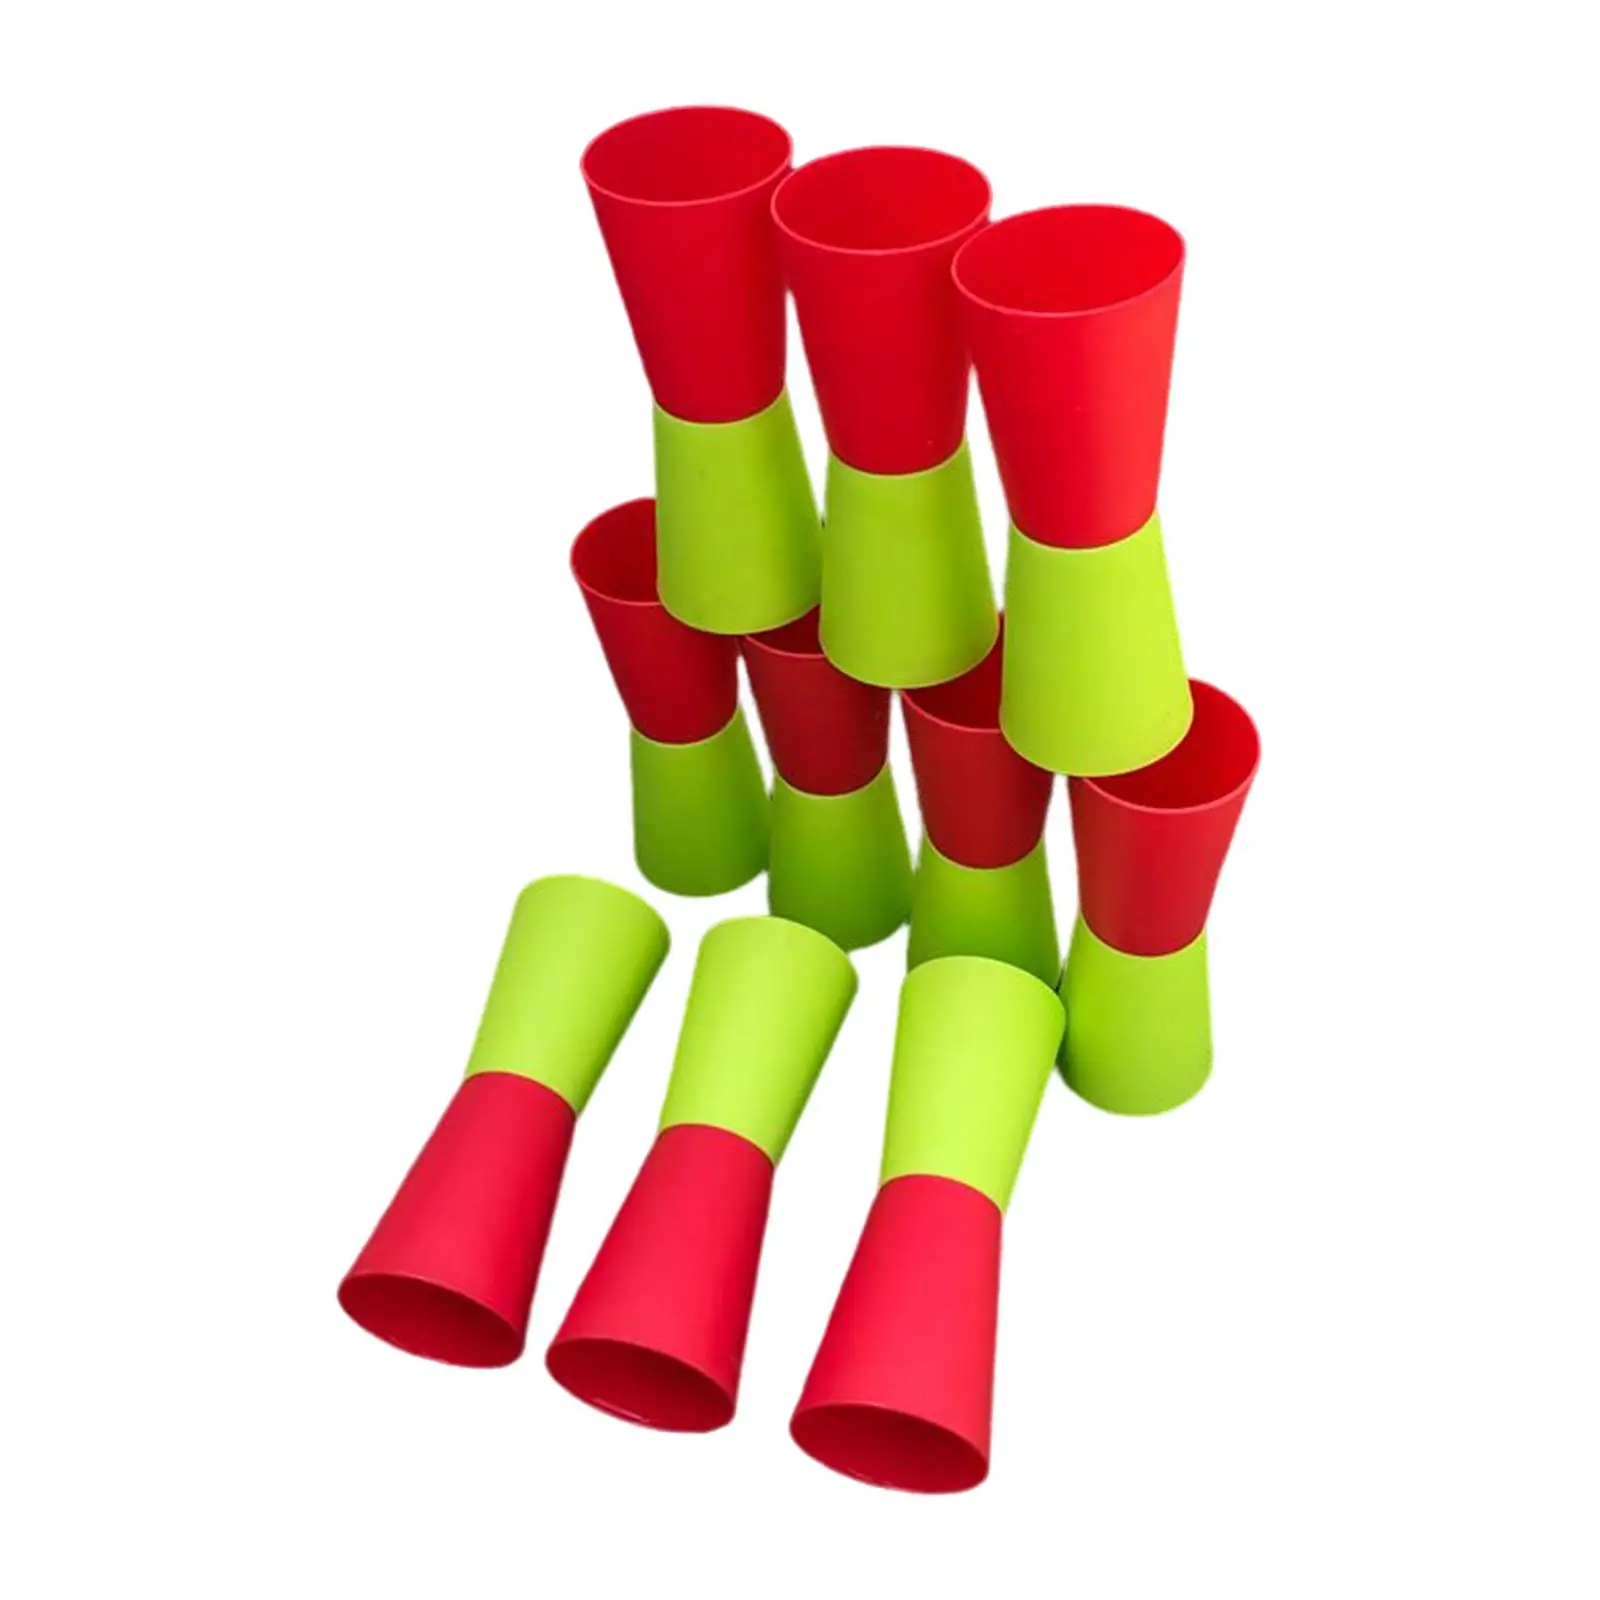 10x Flip Cups Speed Agility Training Aid Exercise Running Reversed Cups for Football Activity Festive Gym Events Rugby